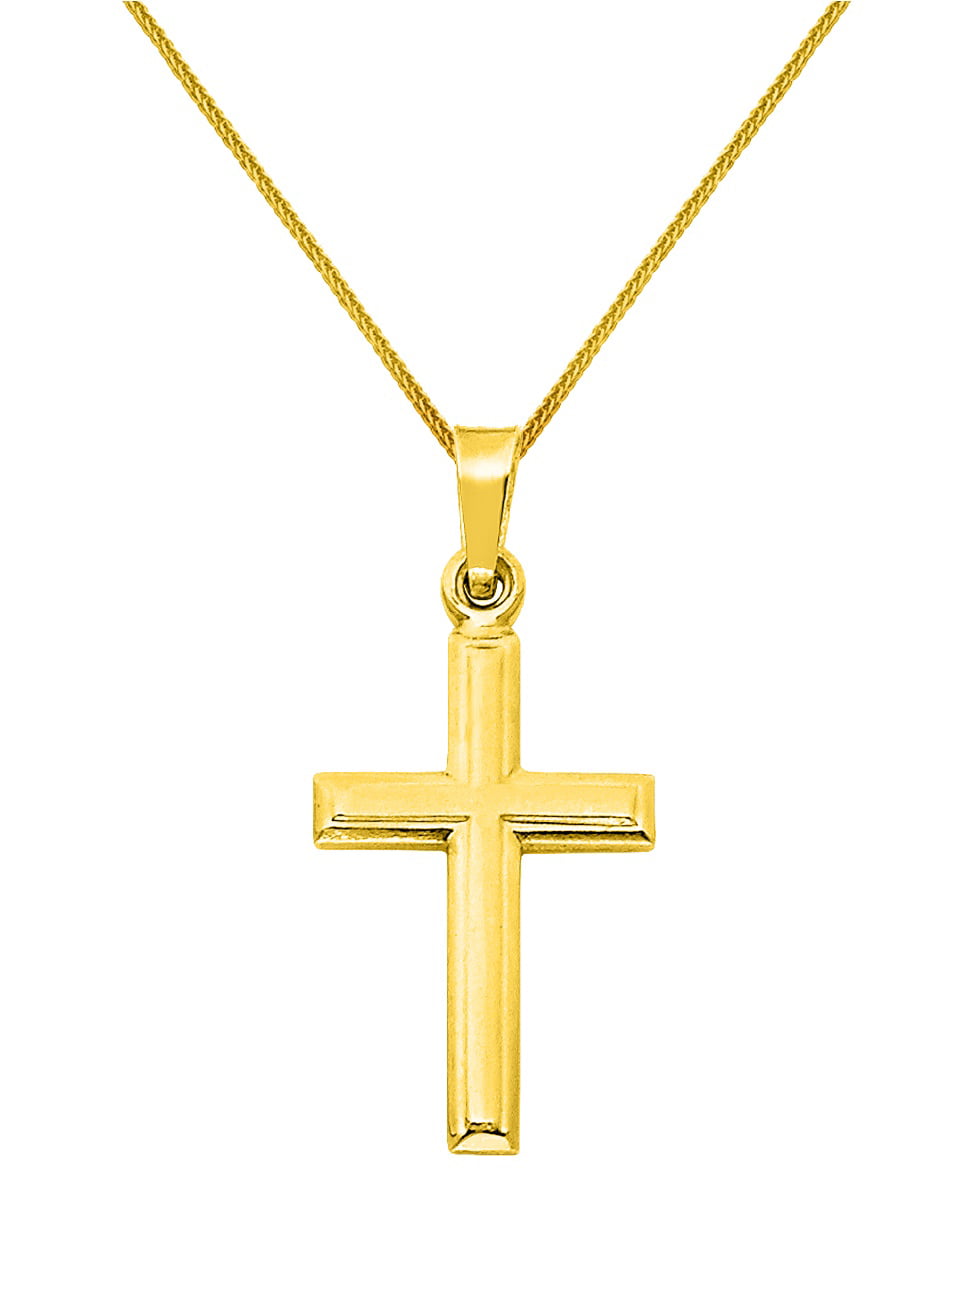 The World Jewelry Center 14k Yellow Gold Crucifix Cross Pendant with 0.8mm Braided Square Wheat Chain Necklace 